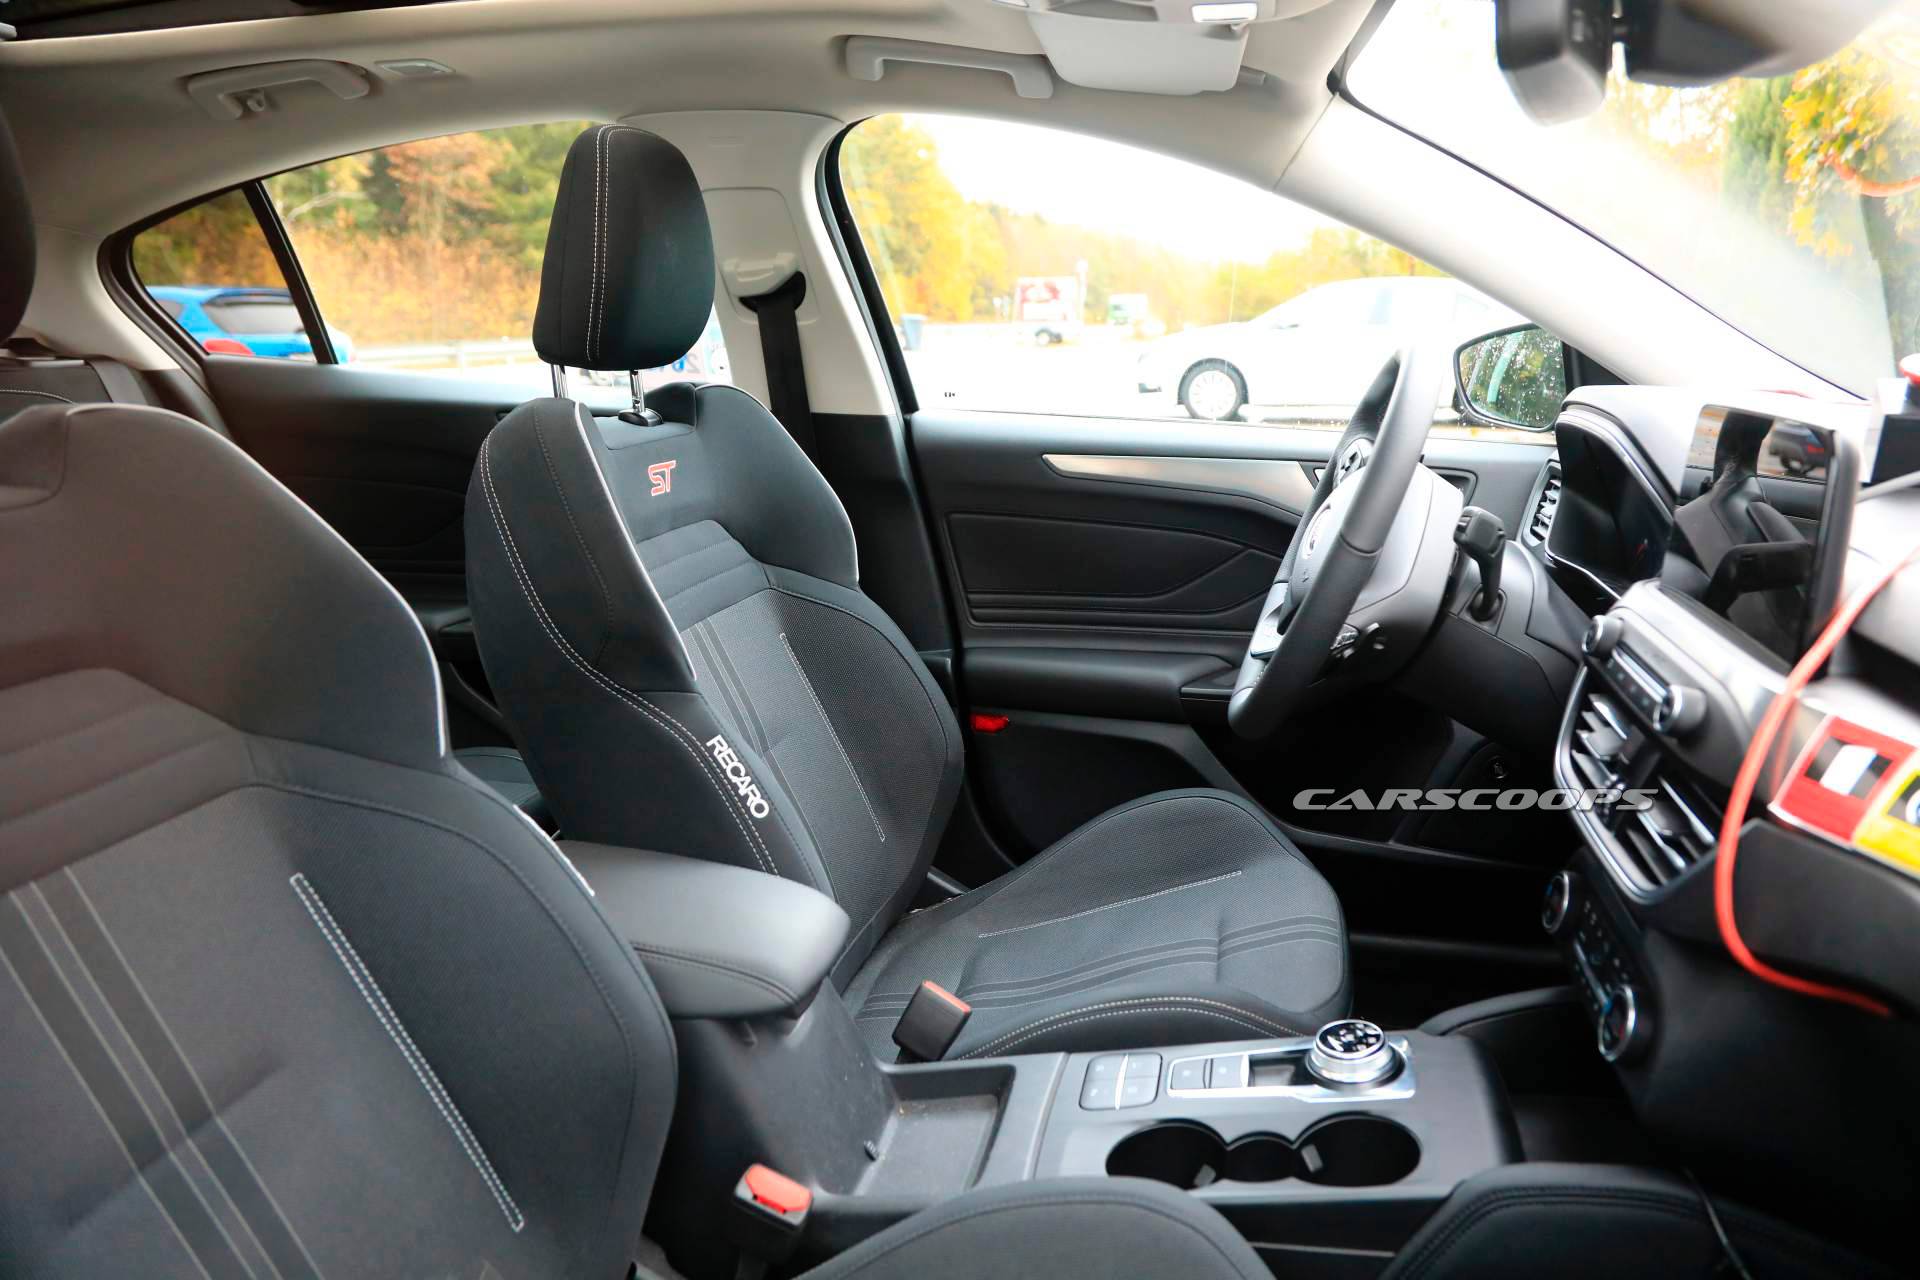 2019 Ford Focus St Here It Is In Production Form Interior